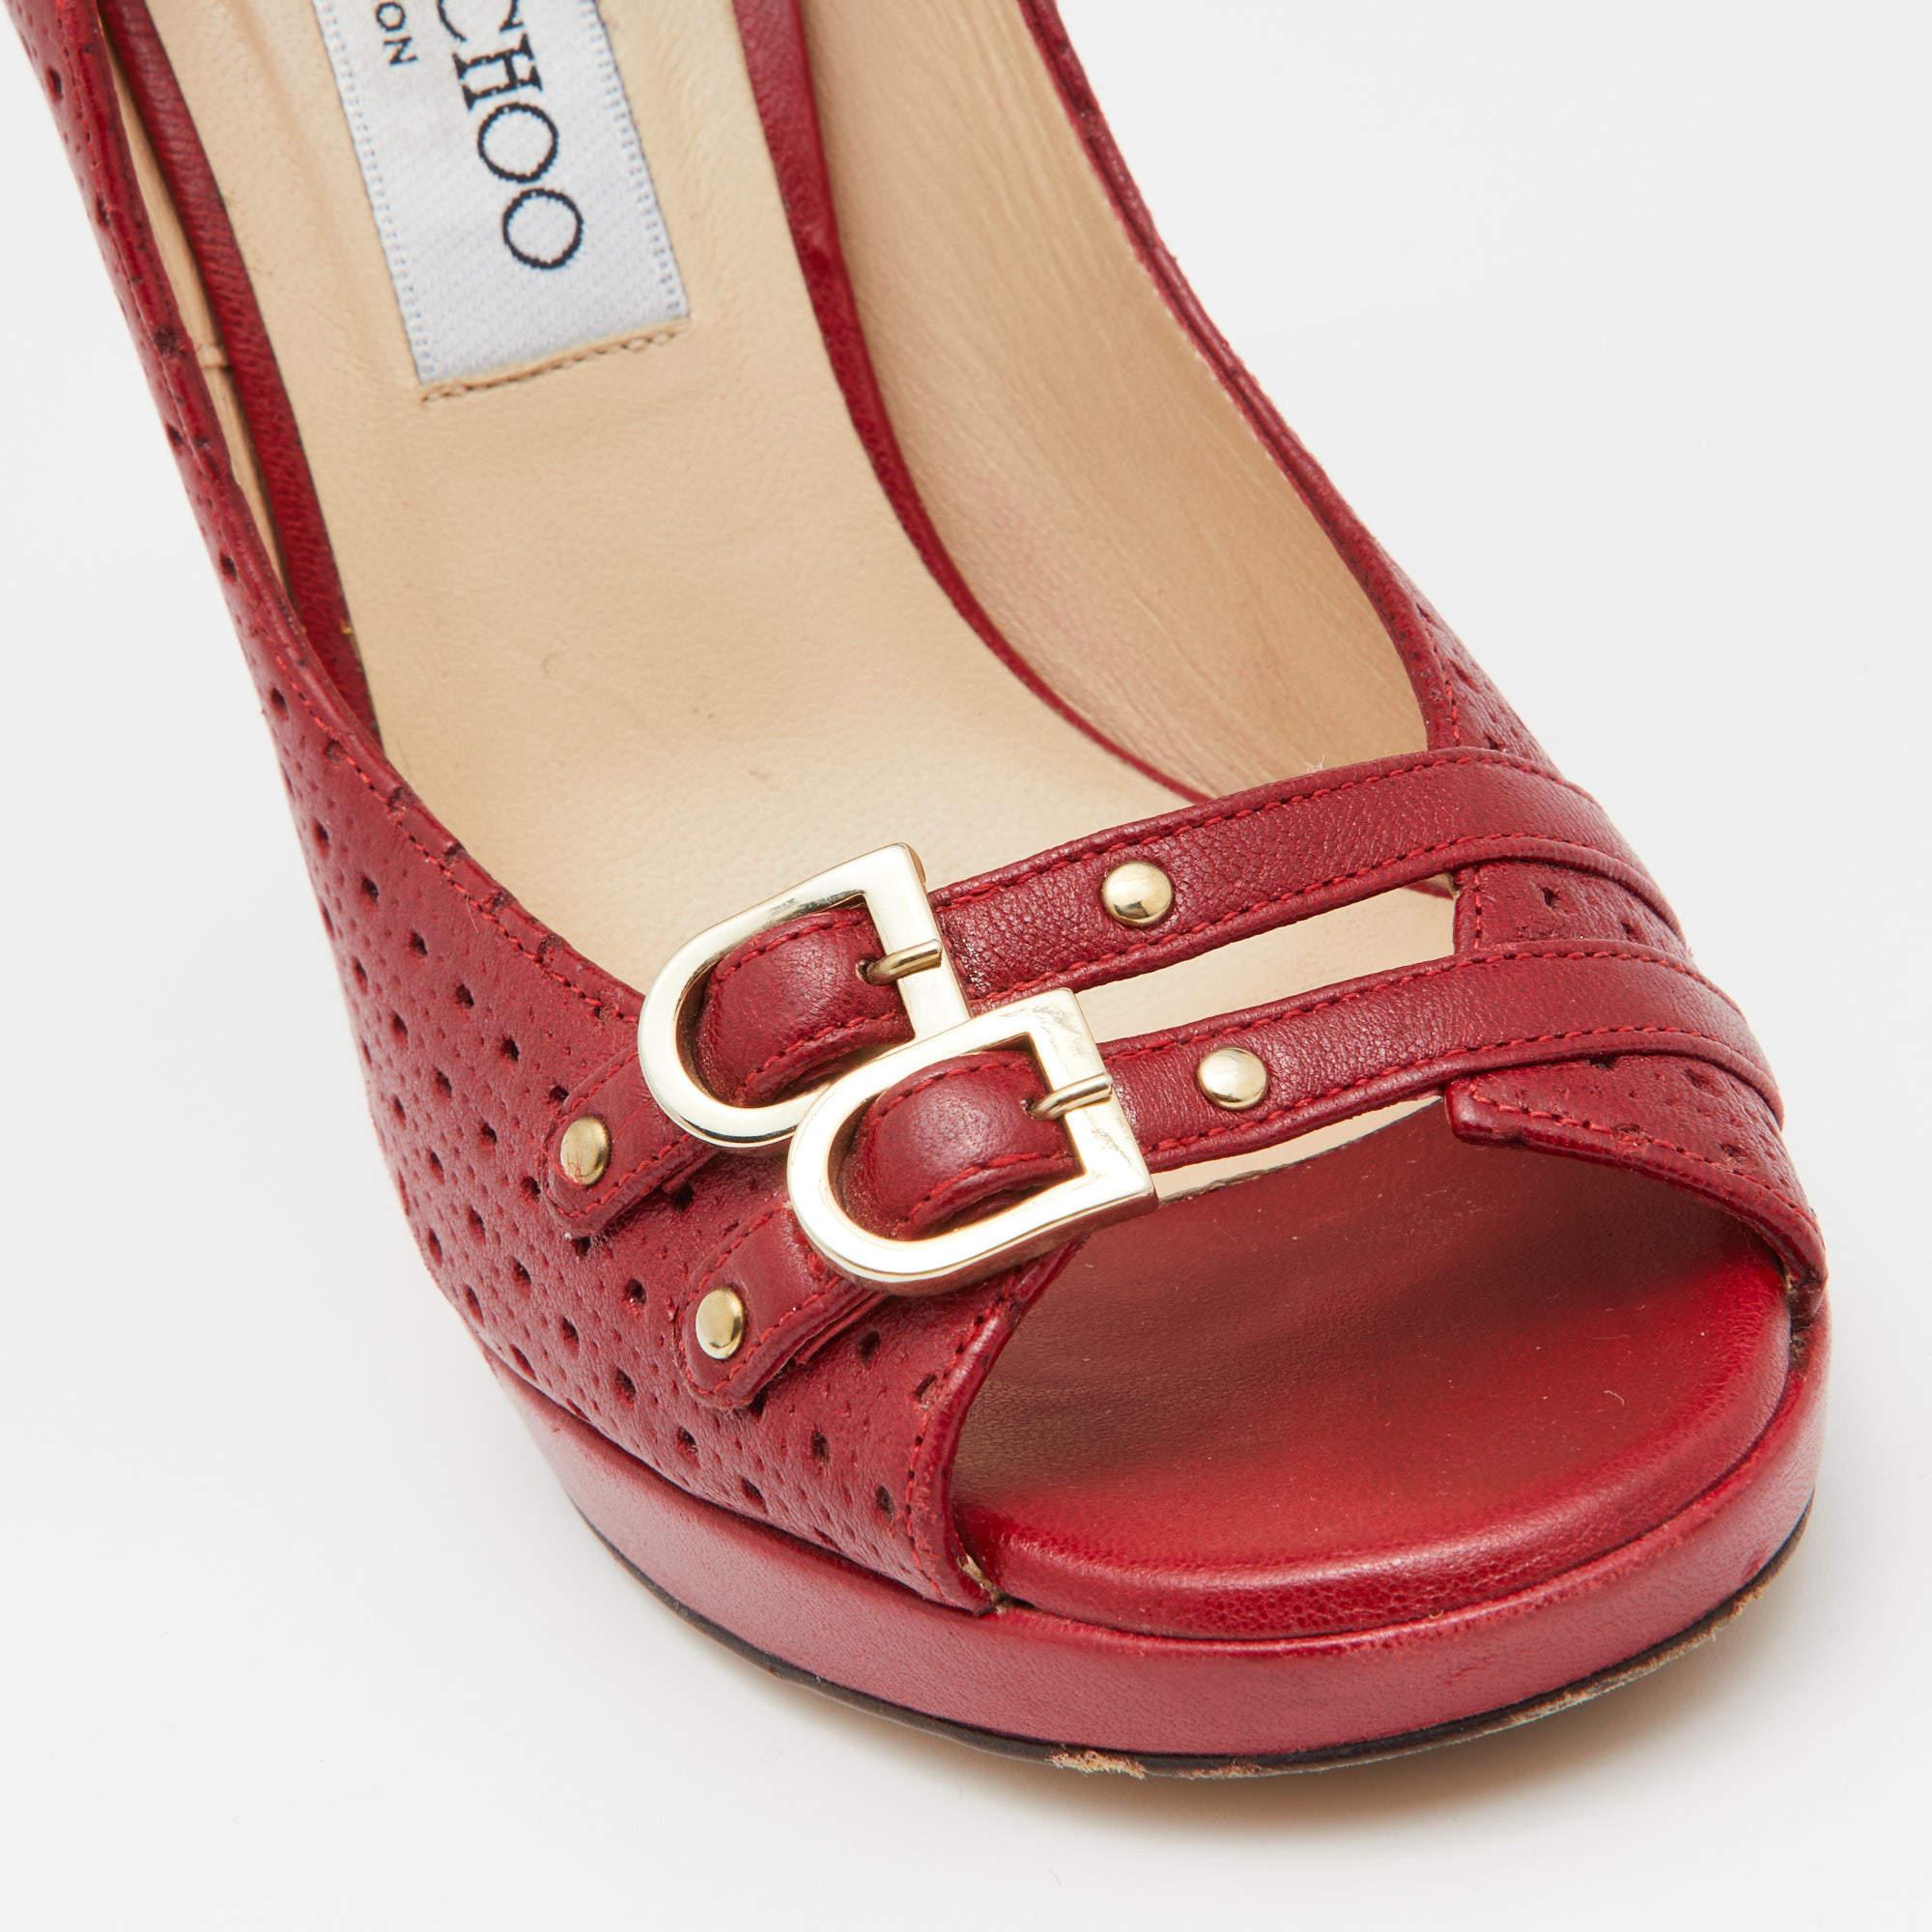 Jimmy Choo Red Perforated Leather Peep Toe Pumps Size 35 1